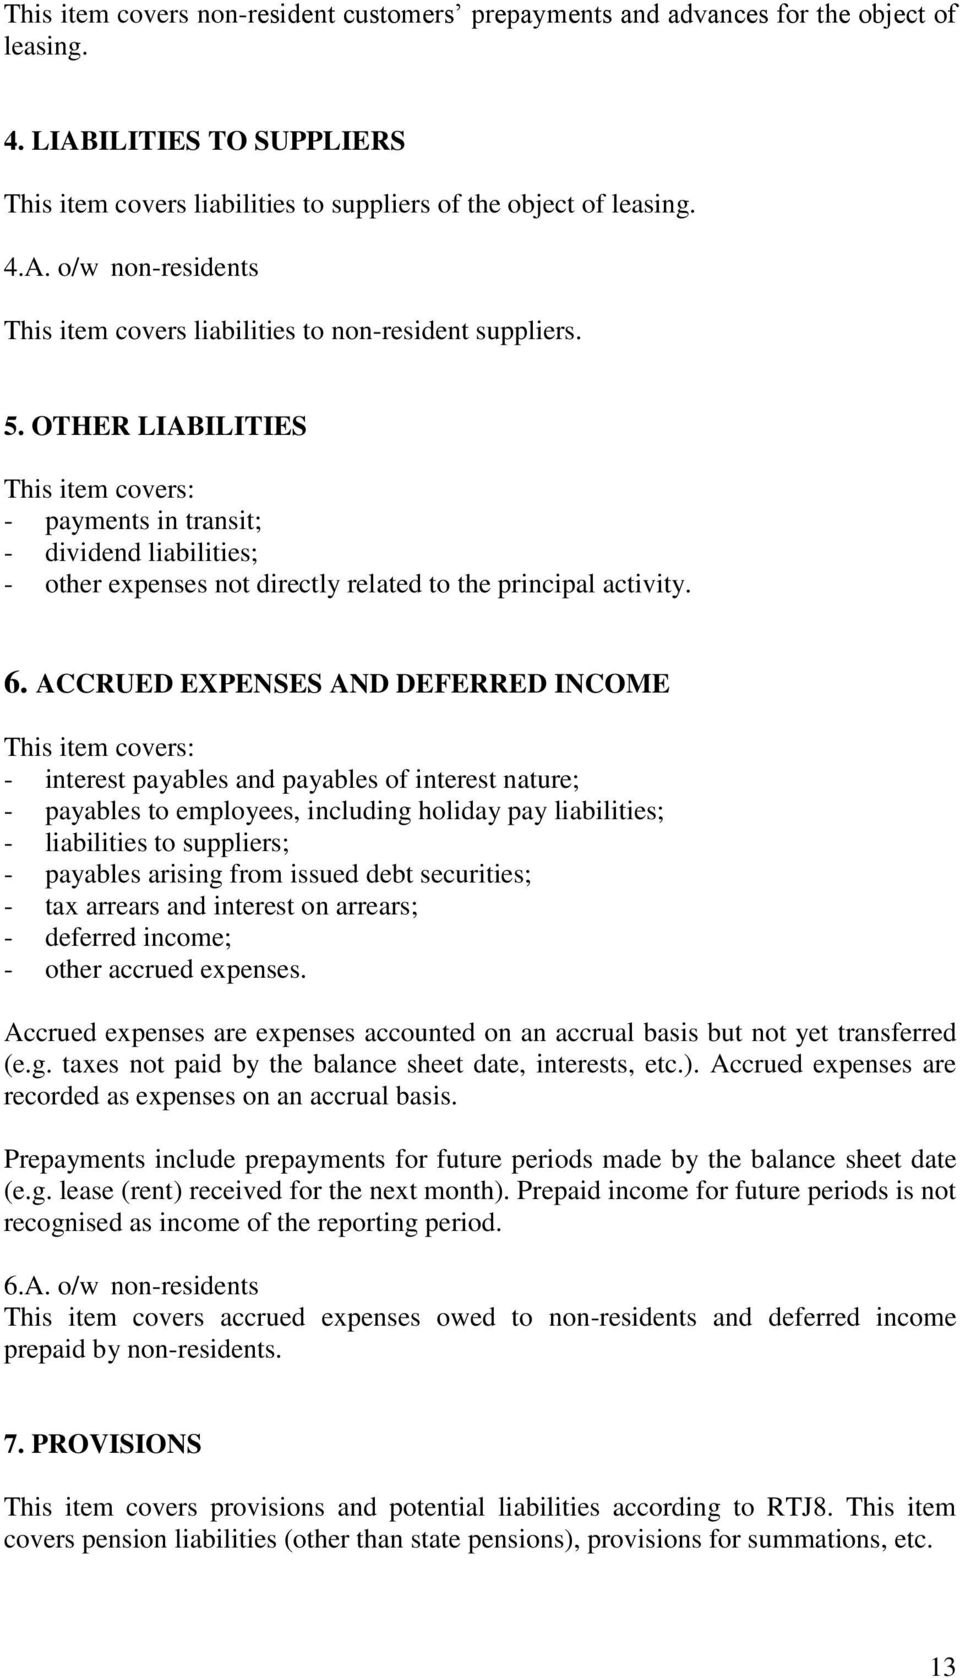 ACCRUED EXPENSES AND DEFERRED INCOME This item covers: - interest payables and payables of interest nature; - payables to employees, including holiday pay liabilities; - liabilities to suppliers; -